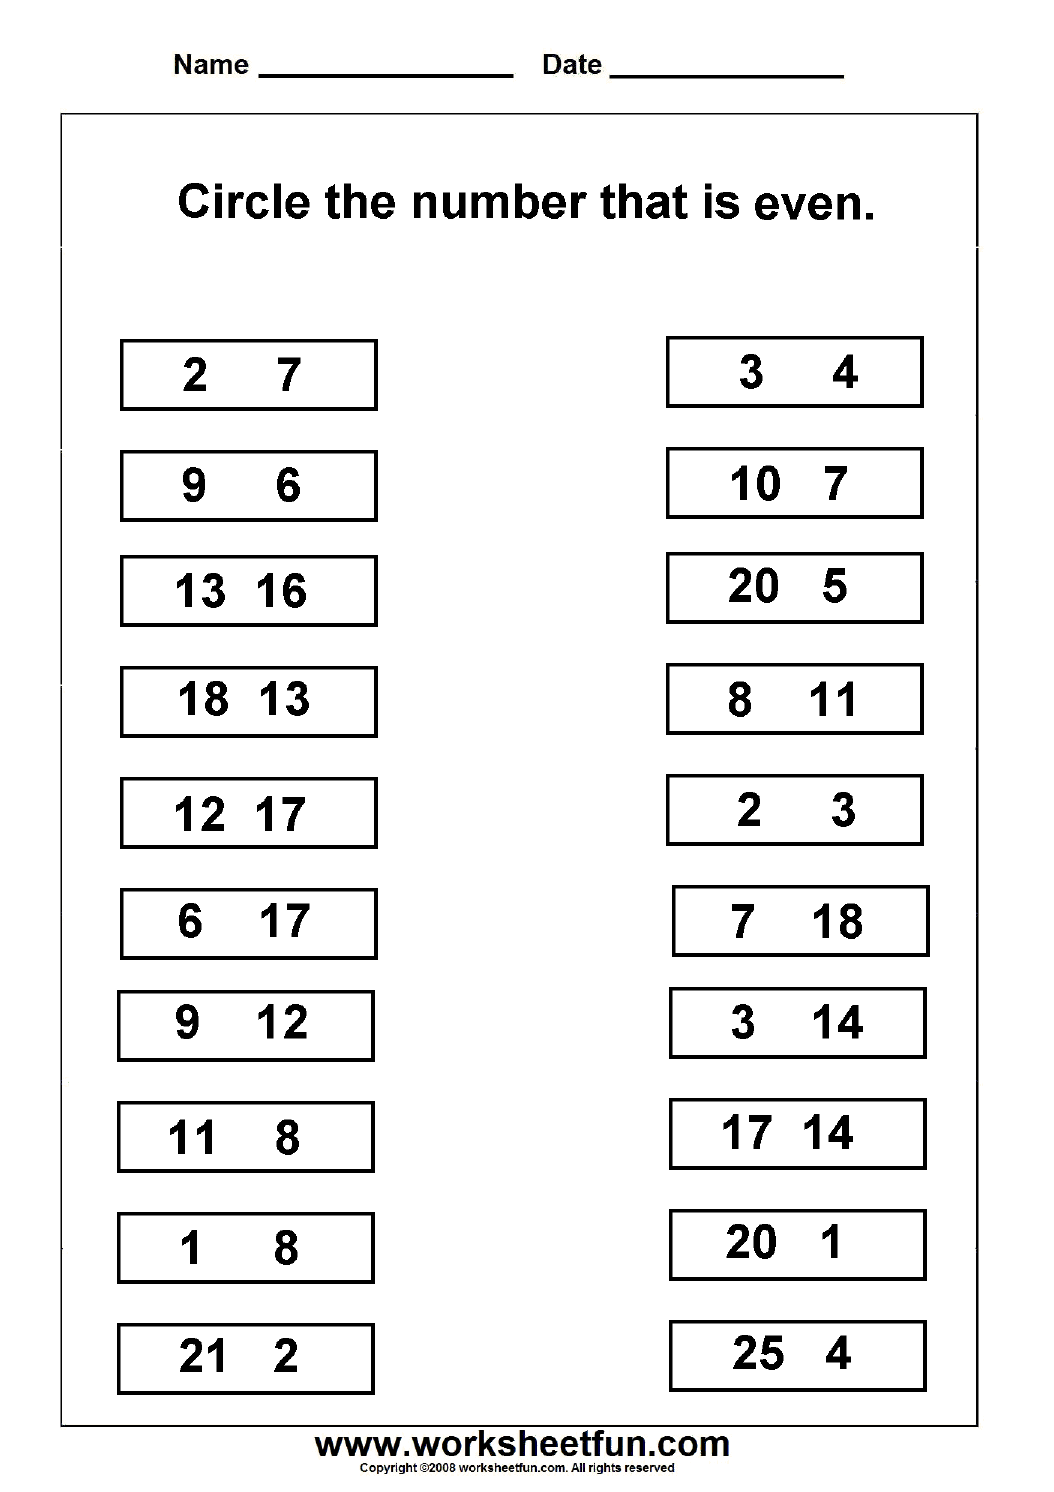 Odd And Even Numbers Worksheets